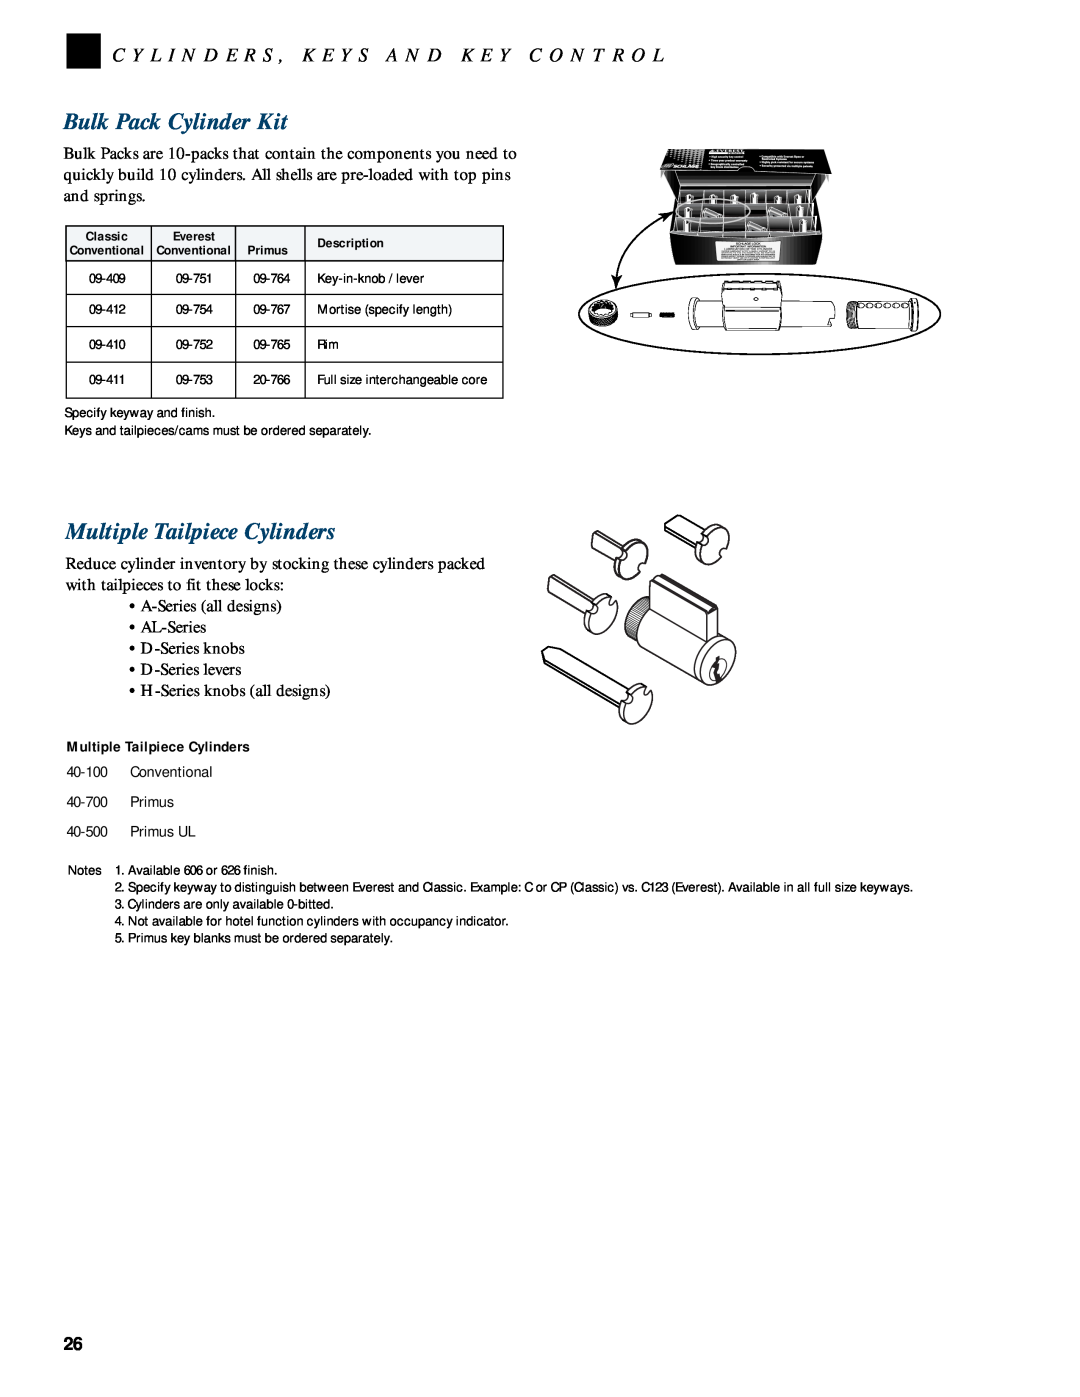 Schlage CYLINDERS manual Bulk Pack Cylinder Kit, Multiple Tailpiece Cylinders, A-Seriesall designs AL-Series D-Seriesknobs 